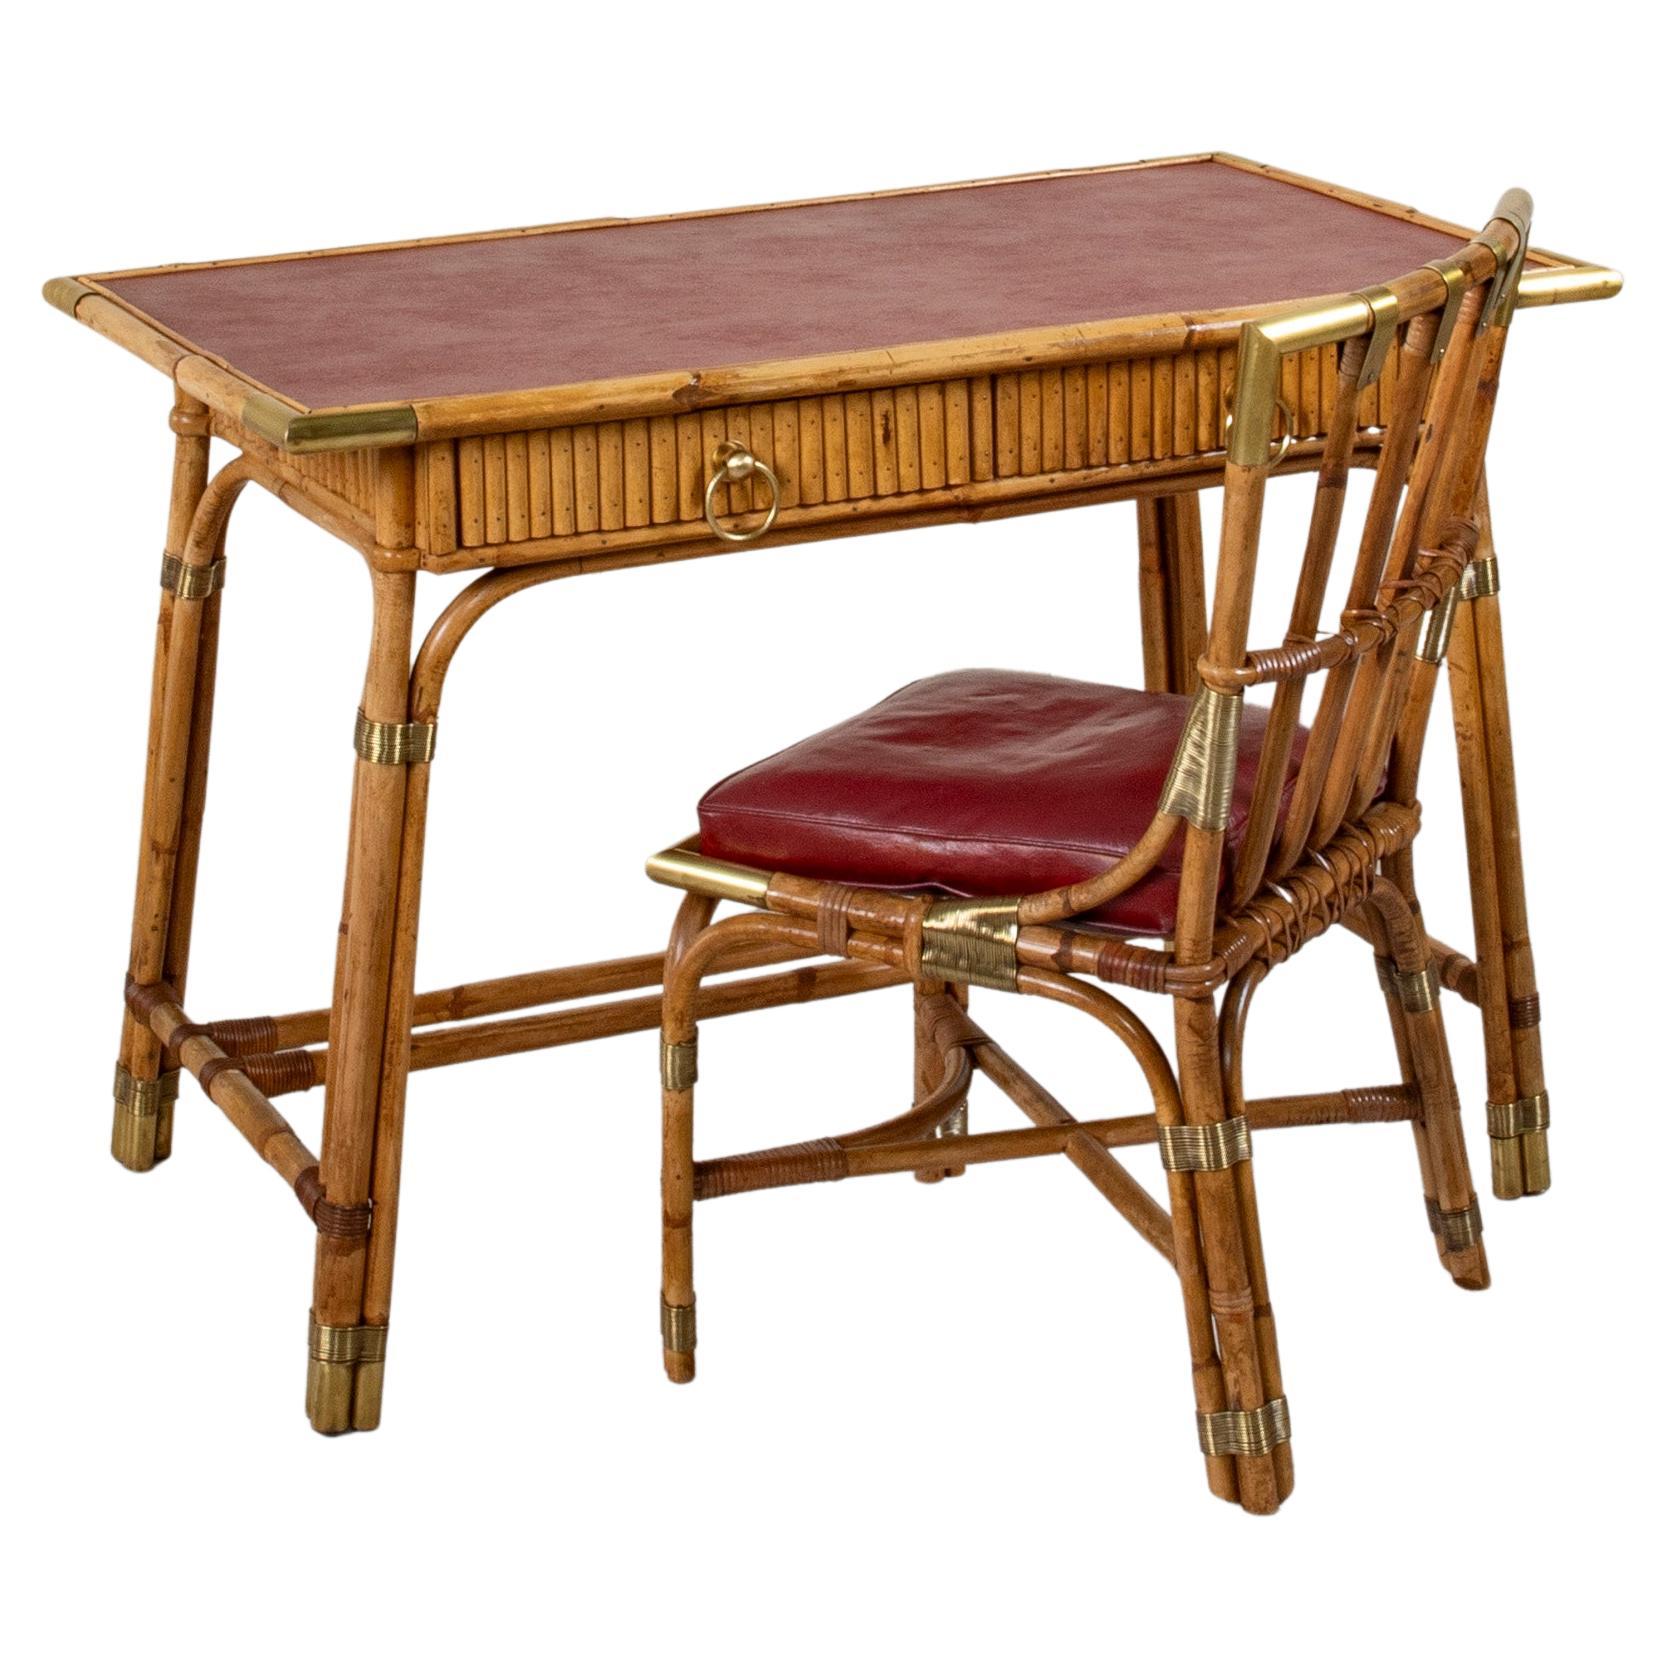 20th Century French Maison Jansen Bamboo Writing Desk and Chair, Louis Sognot For Sale